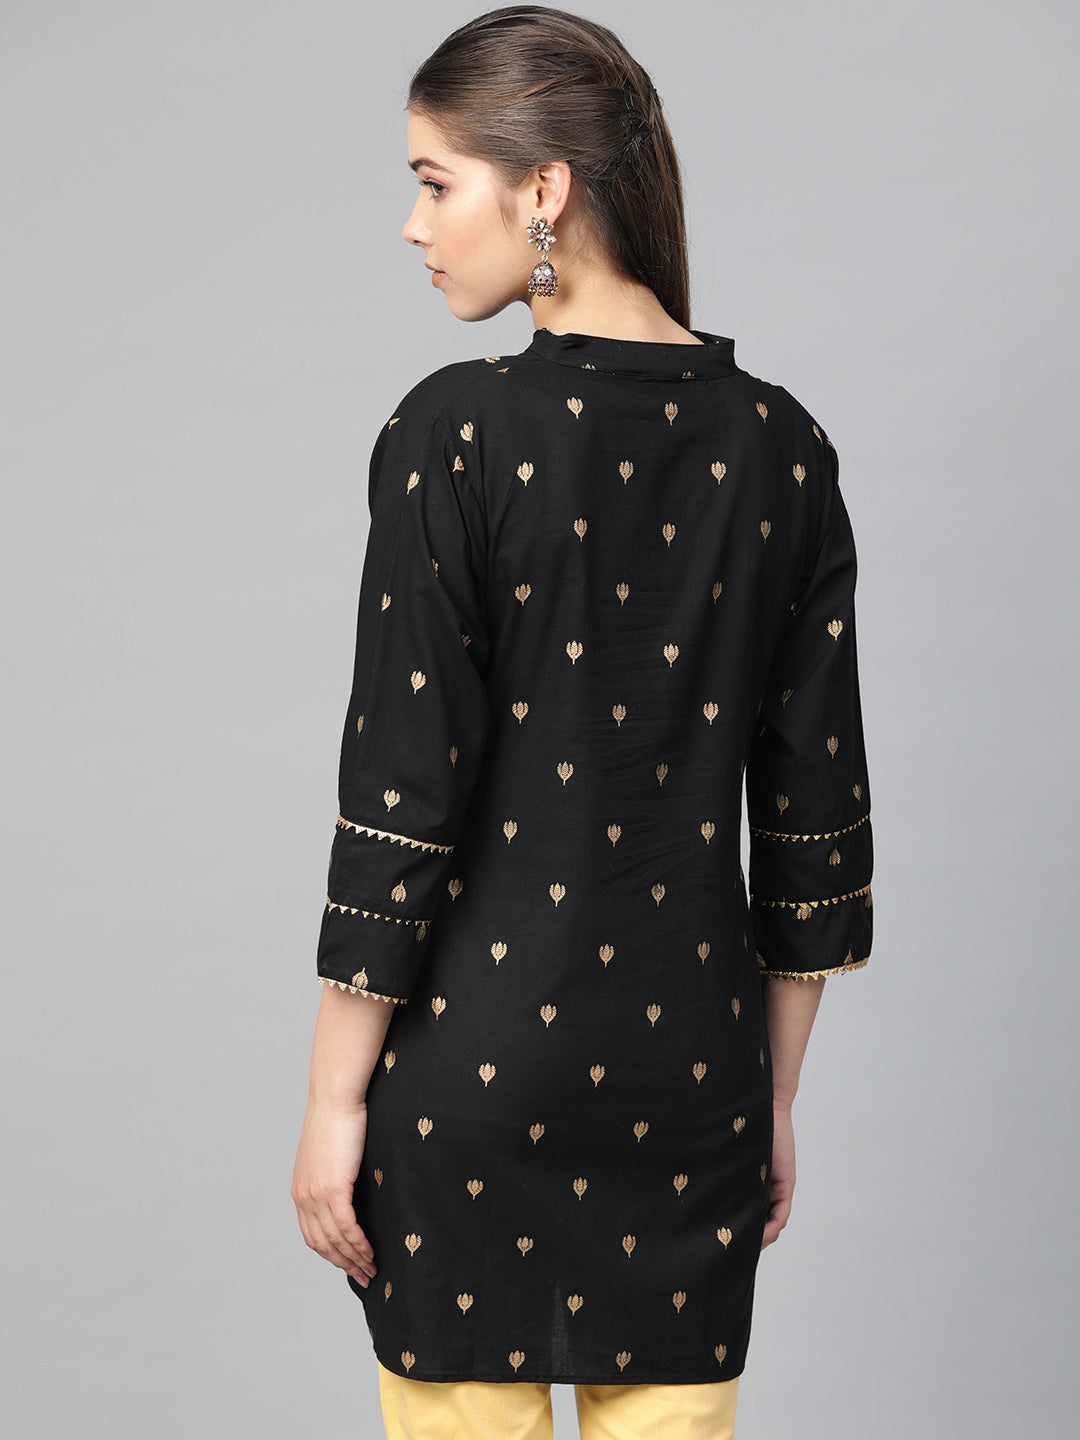 Bhama Couture Black Foil Print Tunic With Side Slit